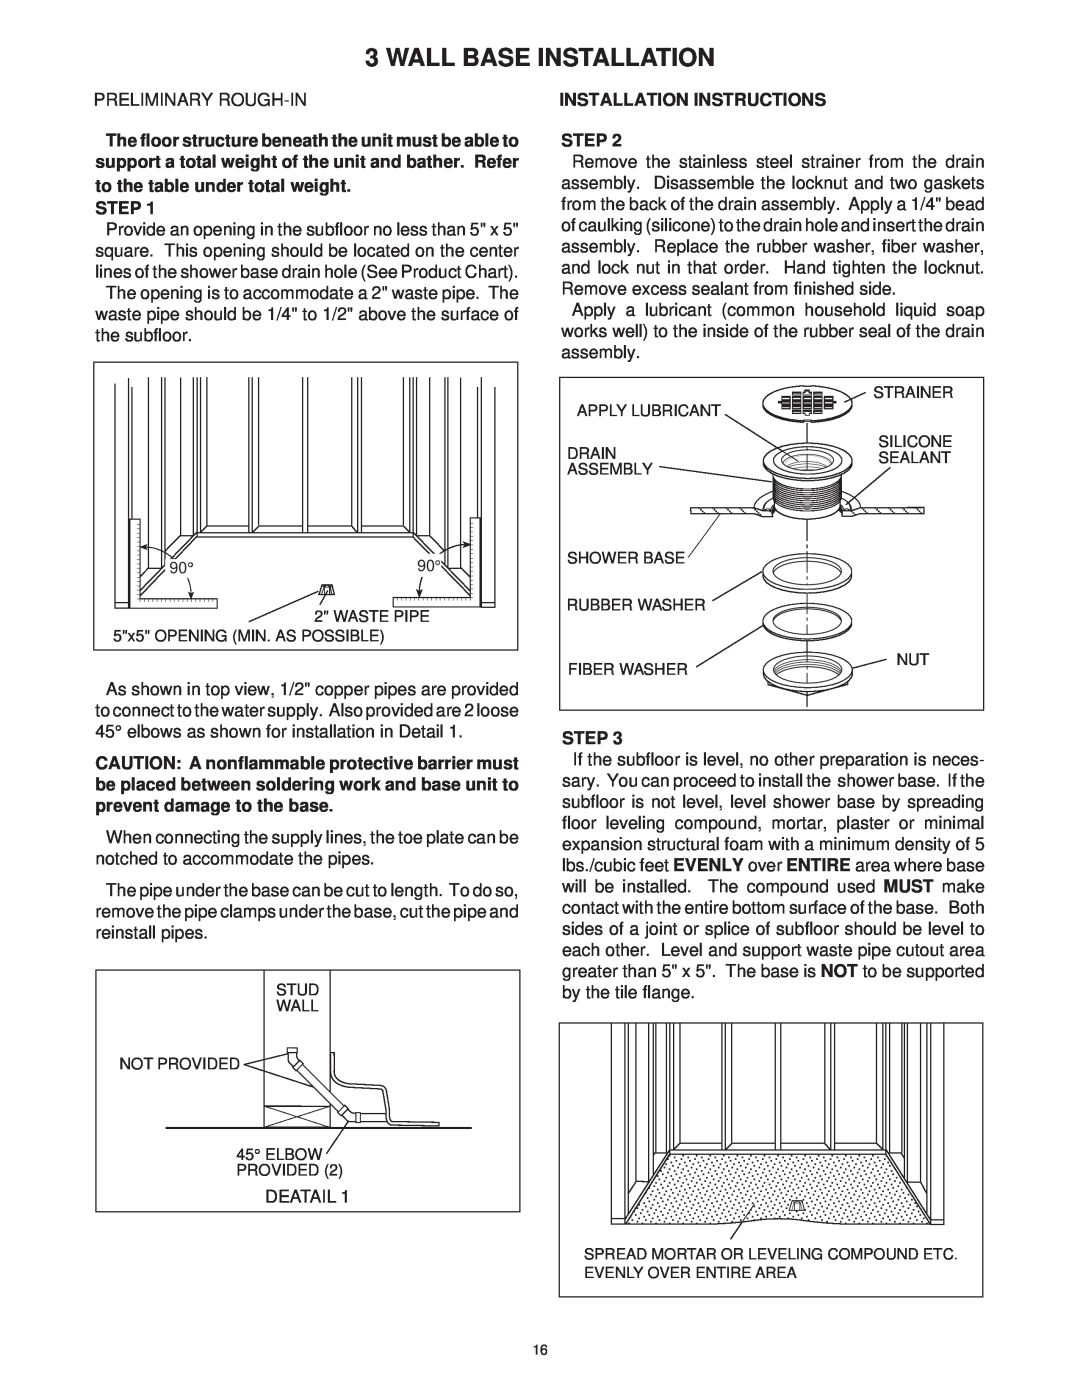 Jacuzzi 2 Wall and 3 Wall manual Wall Base Installation, Installation Instructions Step 